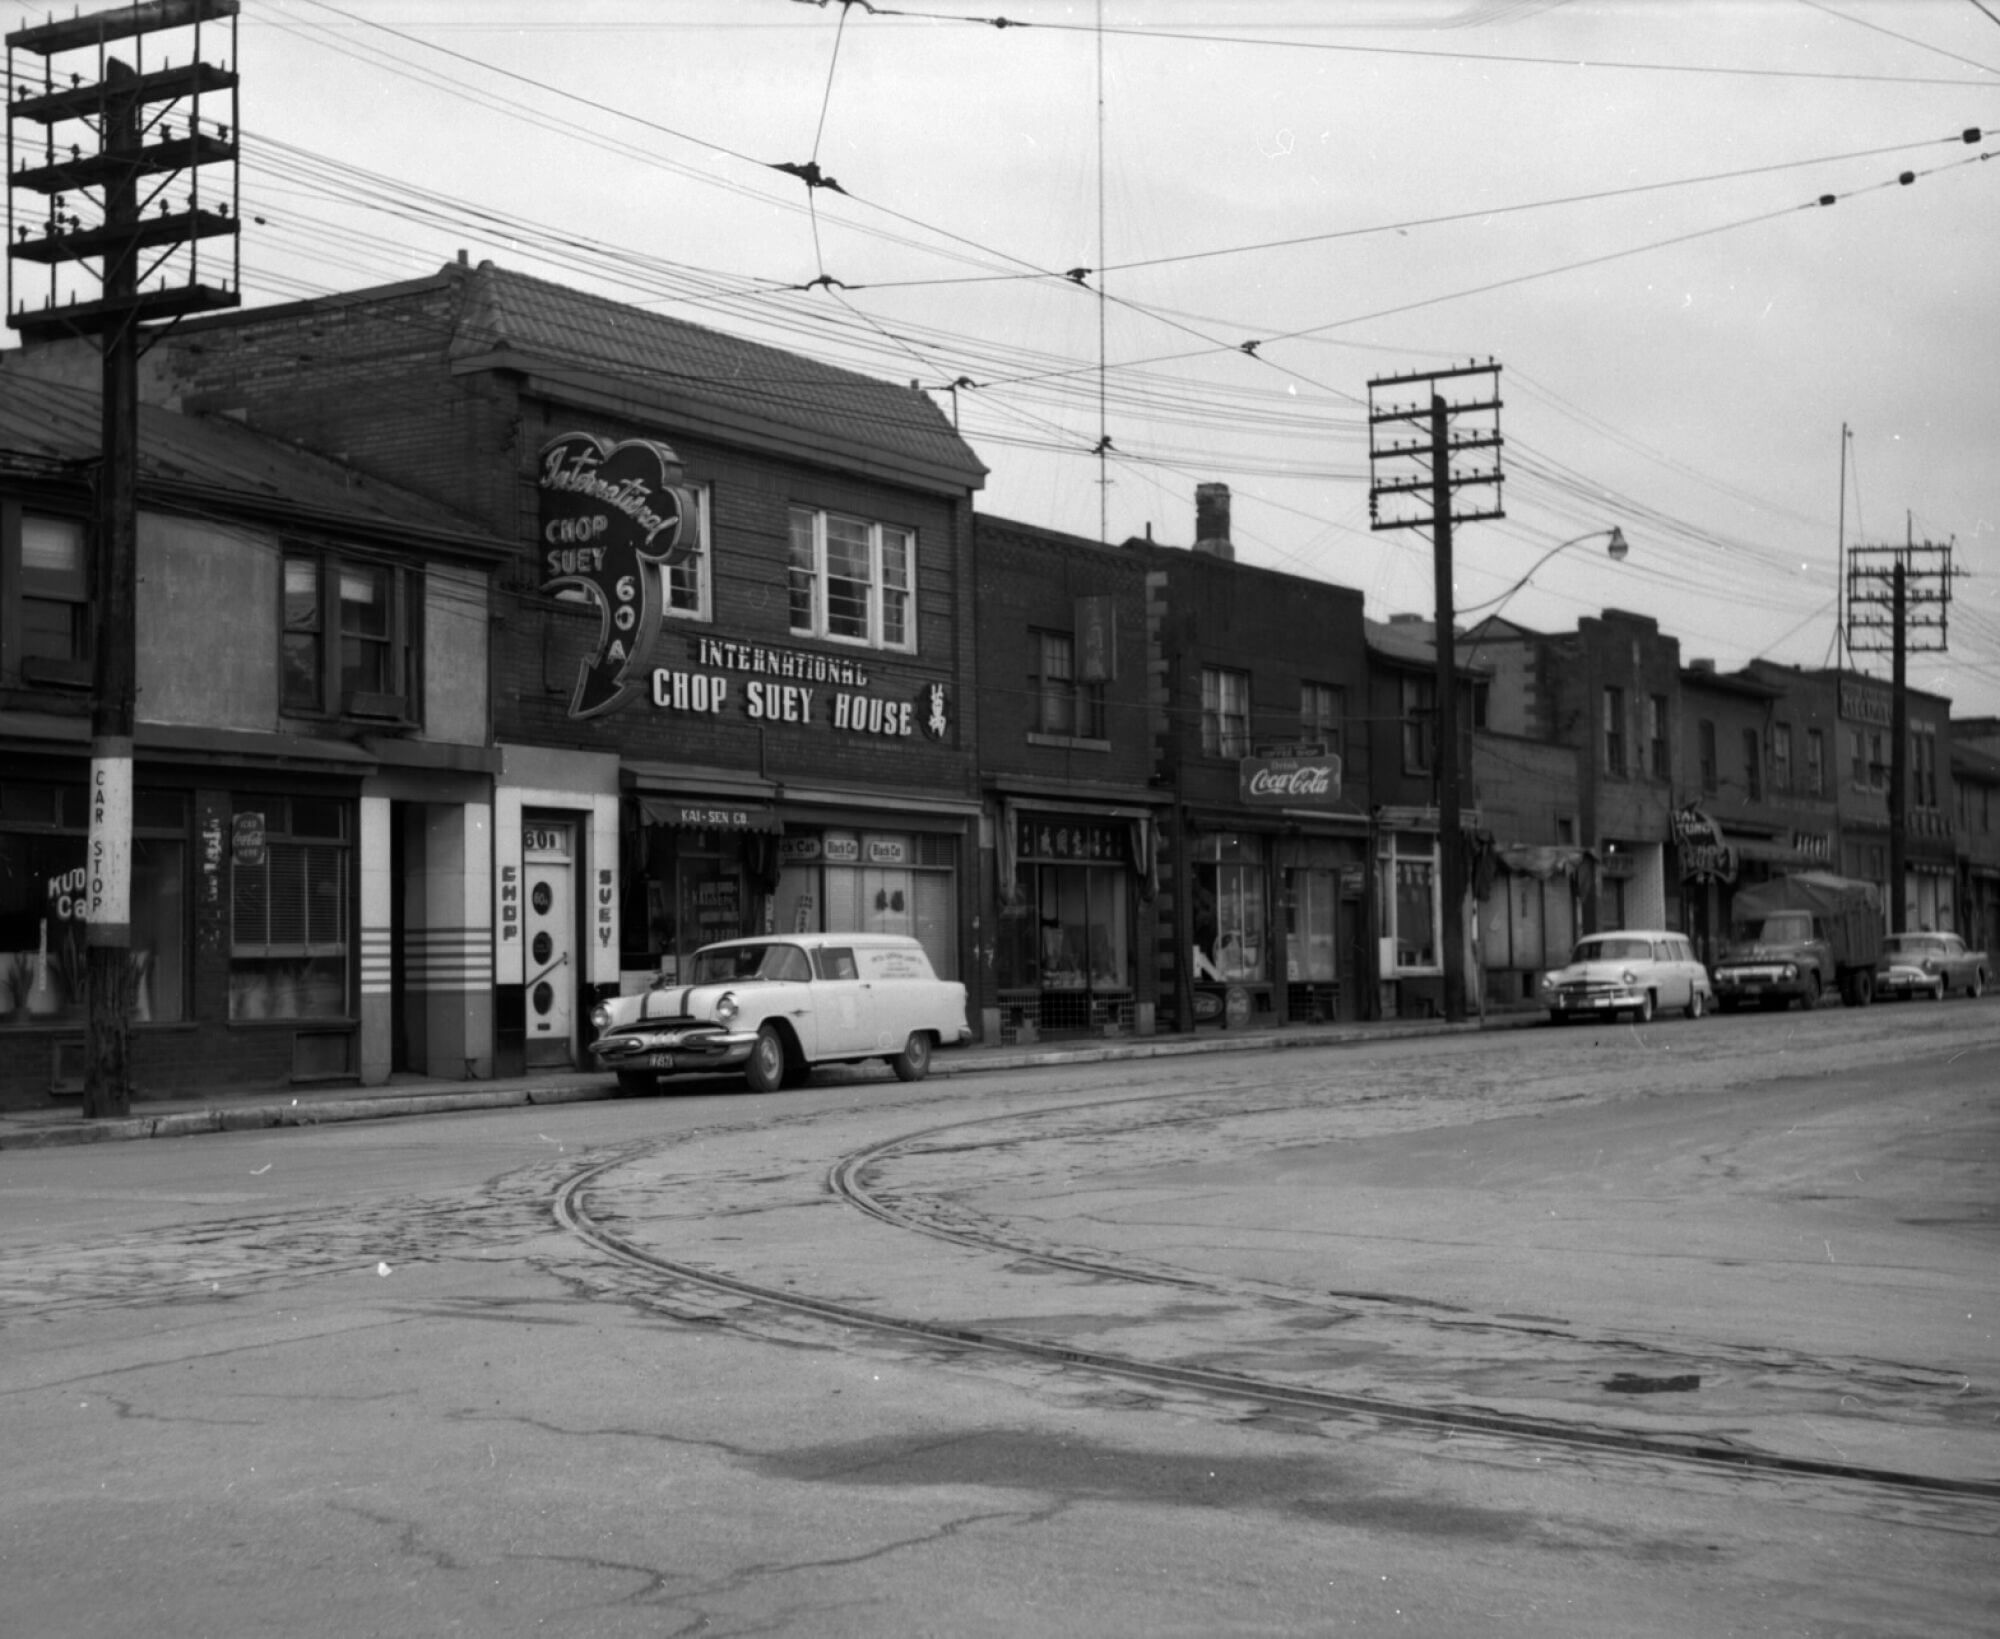 A black and white photograph depicting a street scene. A series of one and two-storey buildings can be seen behind a row of electric poles. The largest building has a sign out front that reads 